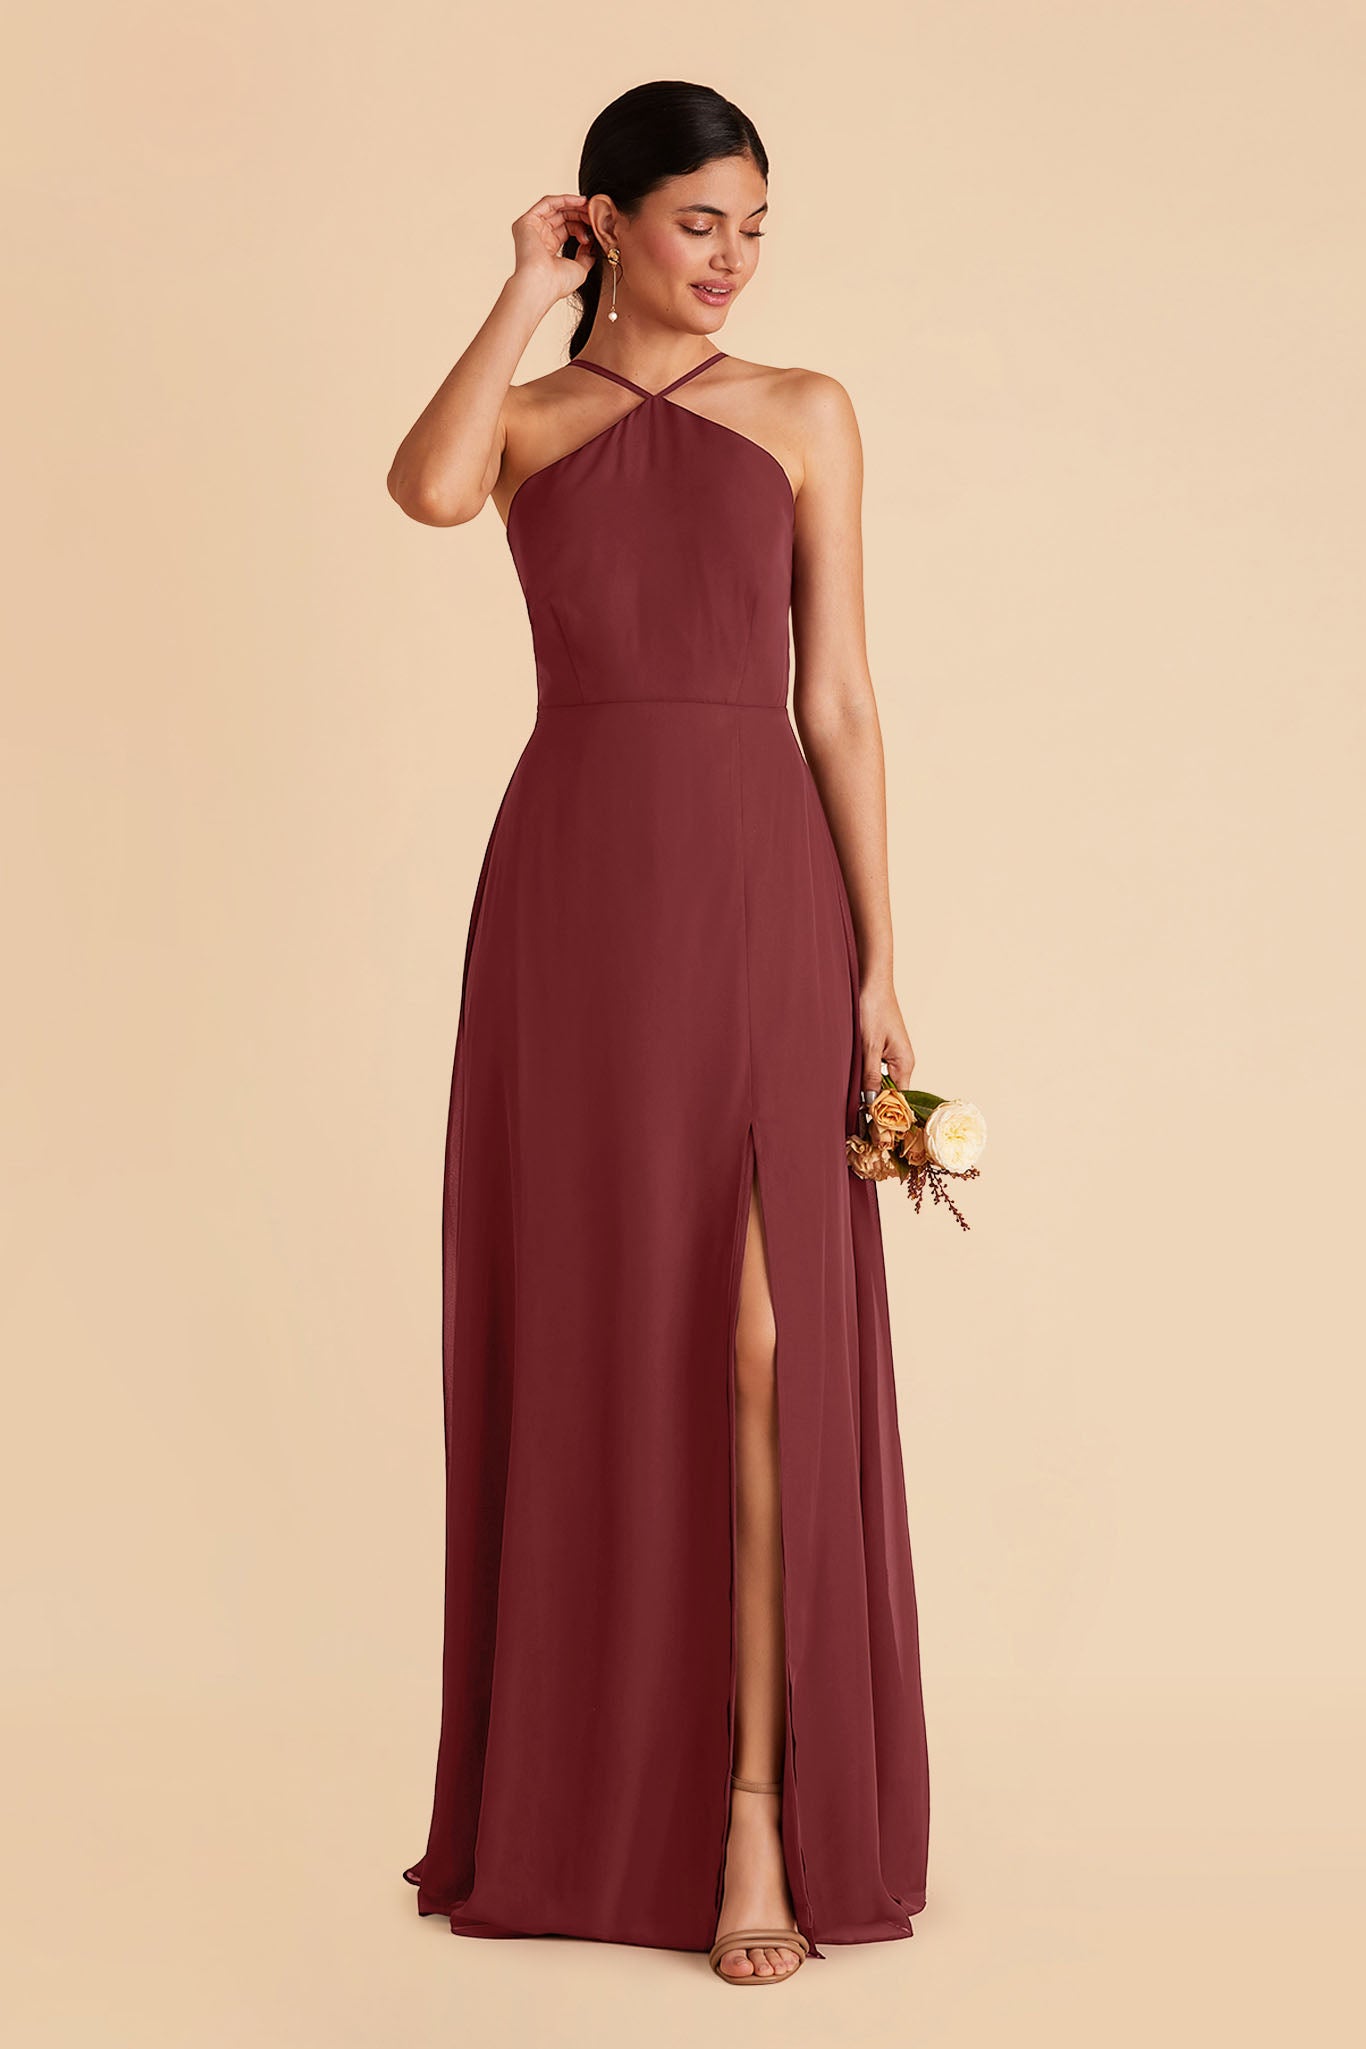 I had been dreading going bridesmaid dress shopping but ended up having  some fun because I know what shapes to look for in dressers thanks to this  subreddit! Here's a couple that